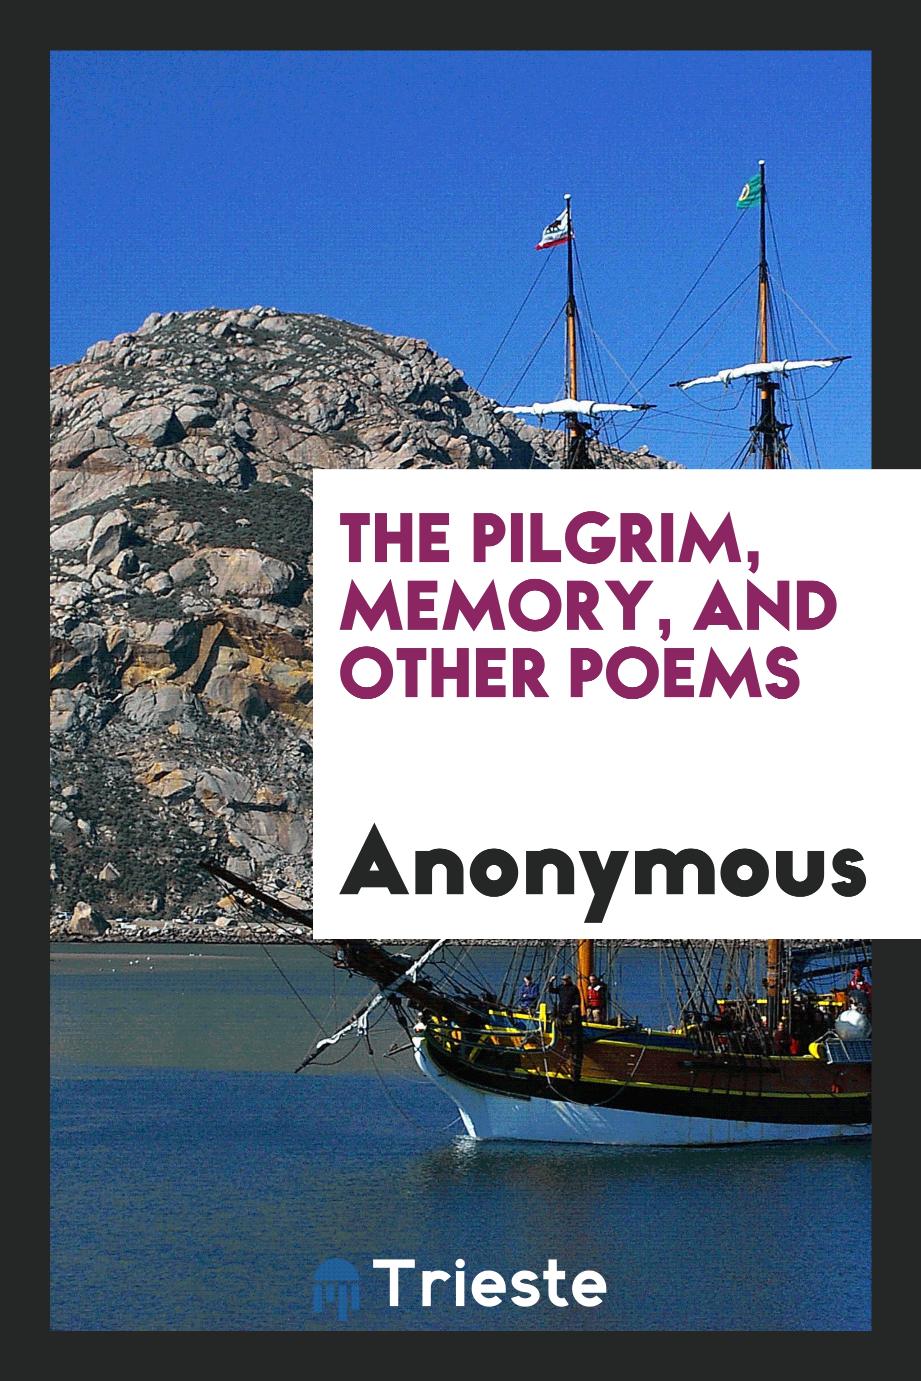 The pilgrim, memory, and other poems